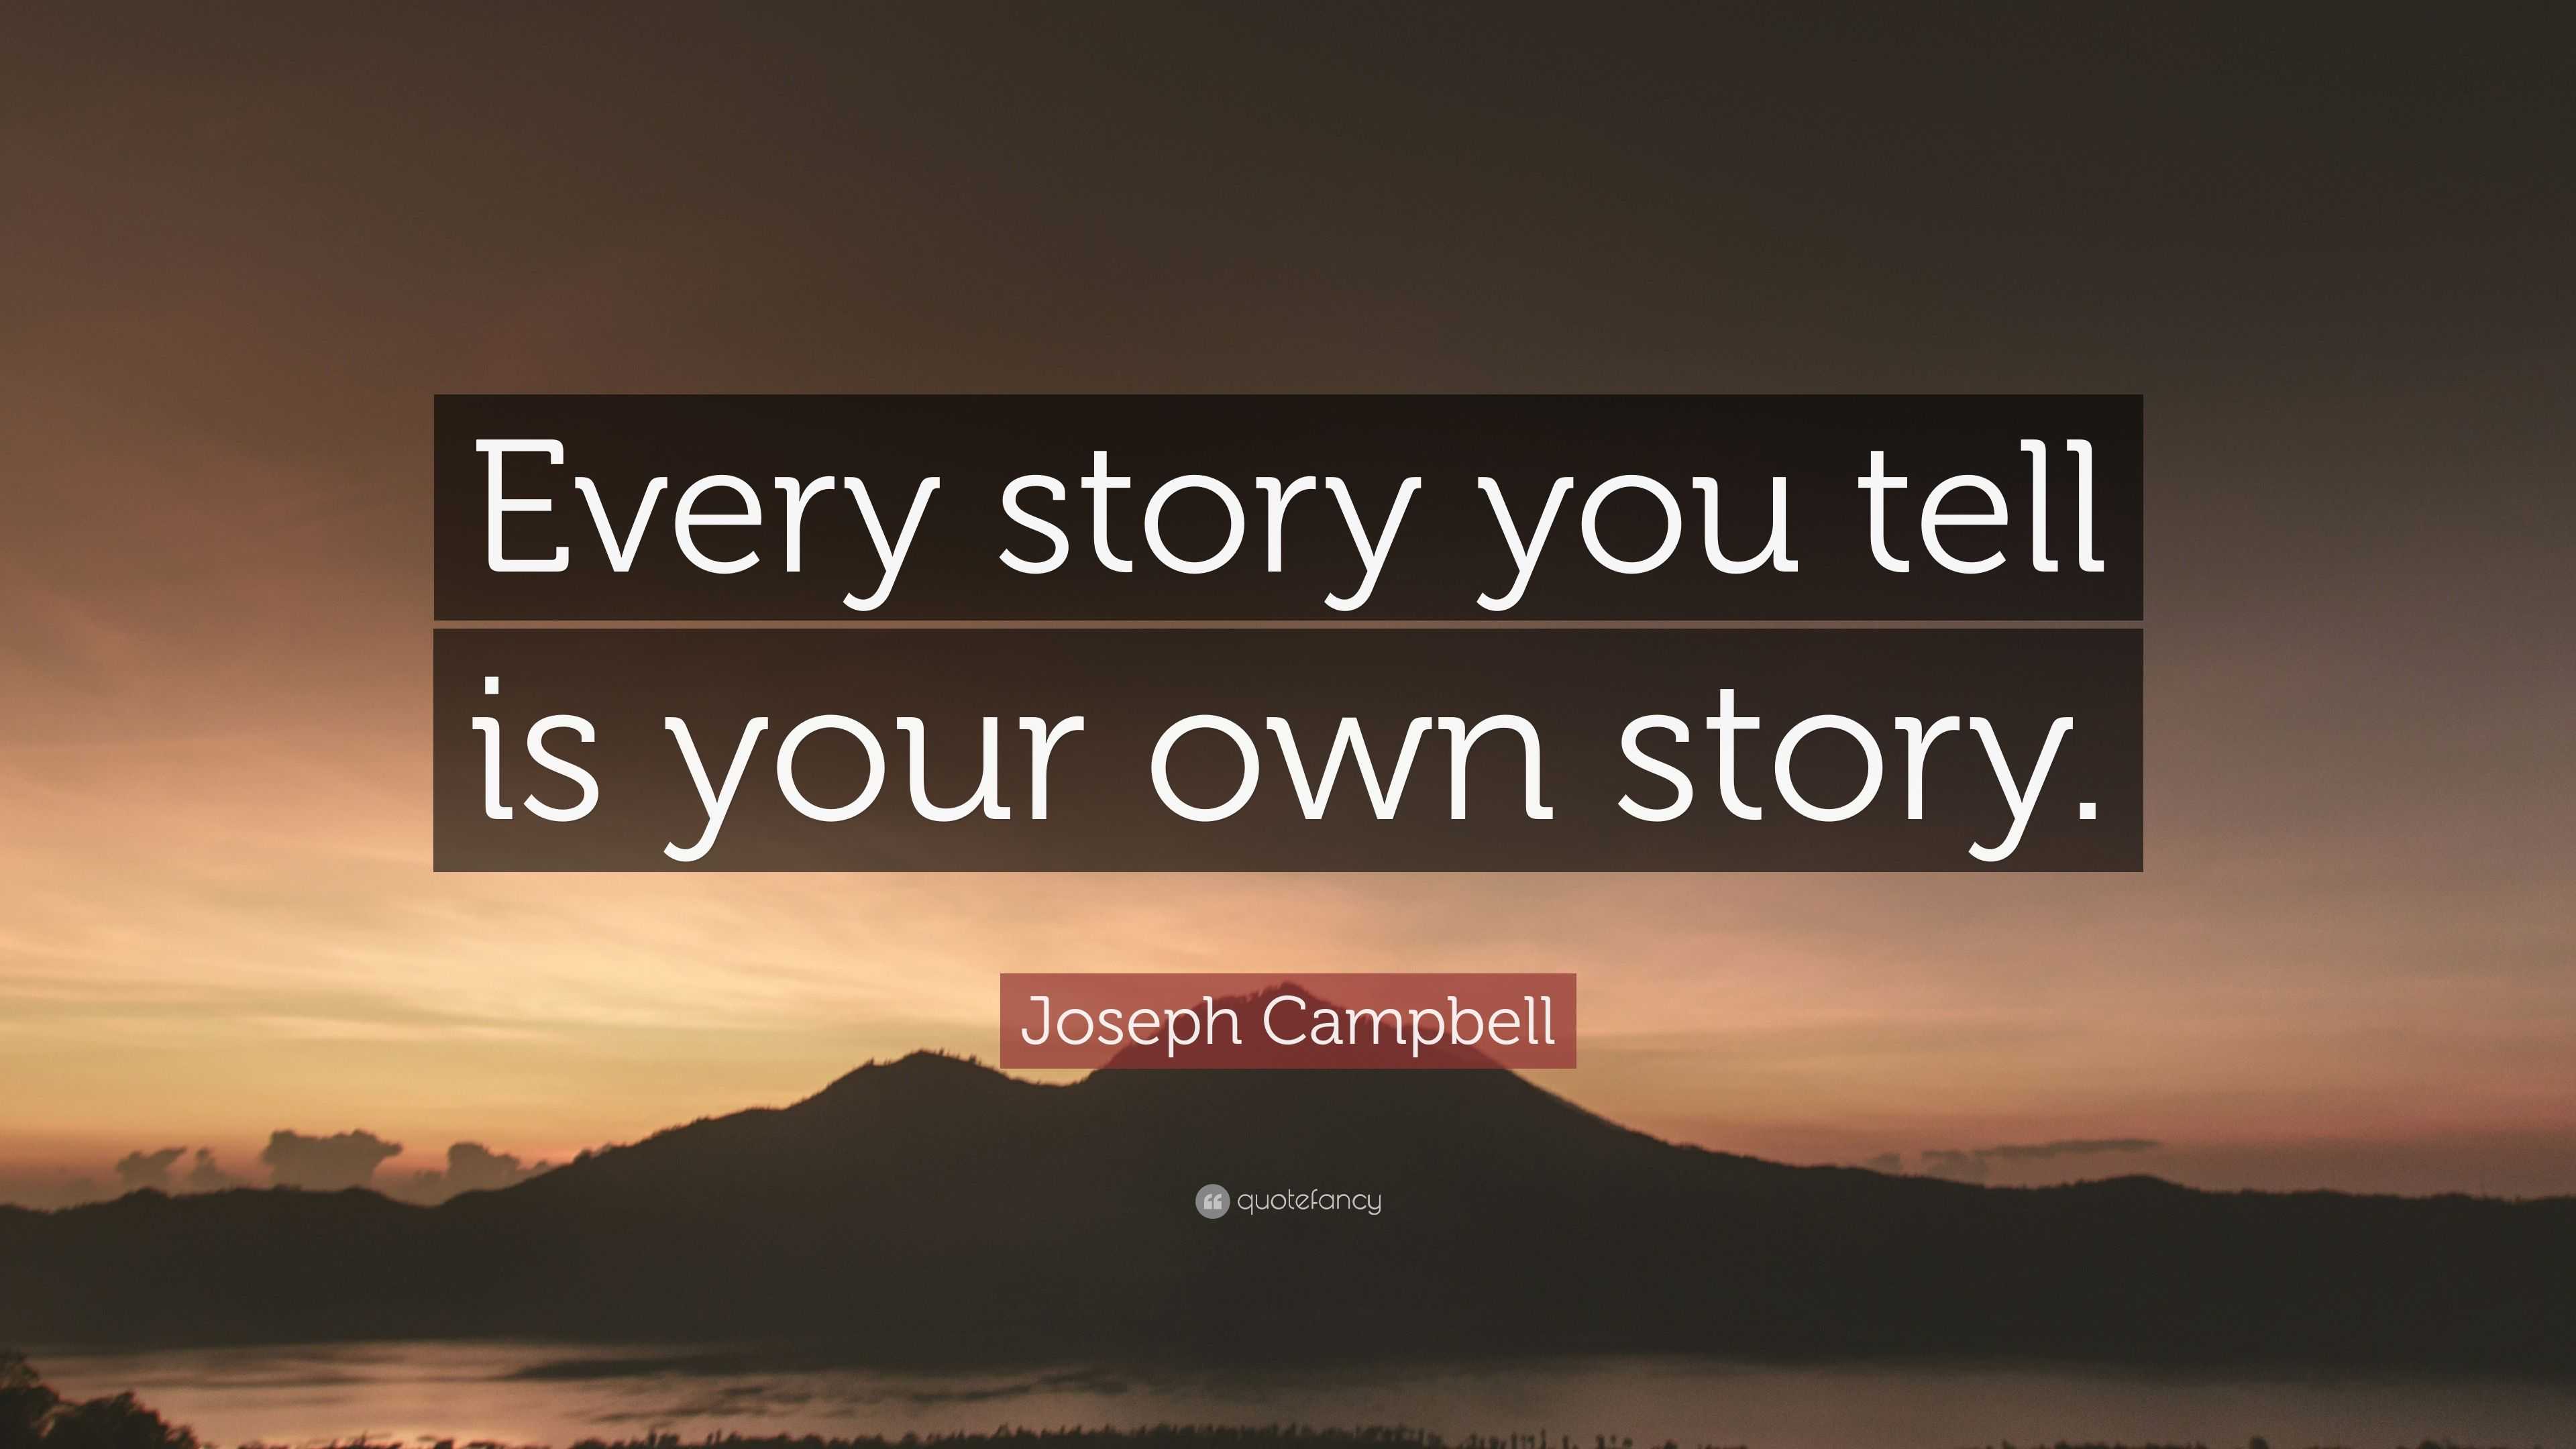 Joseph Campbell Quote: “Every Story You Tell Is Your Own Story.”